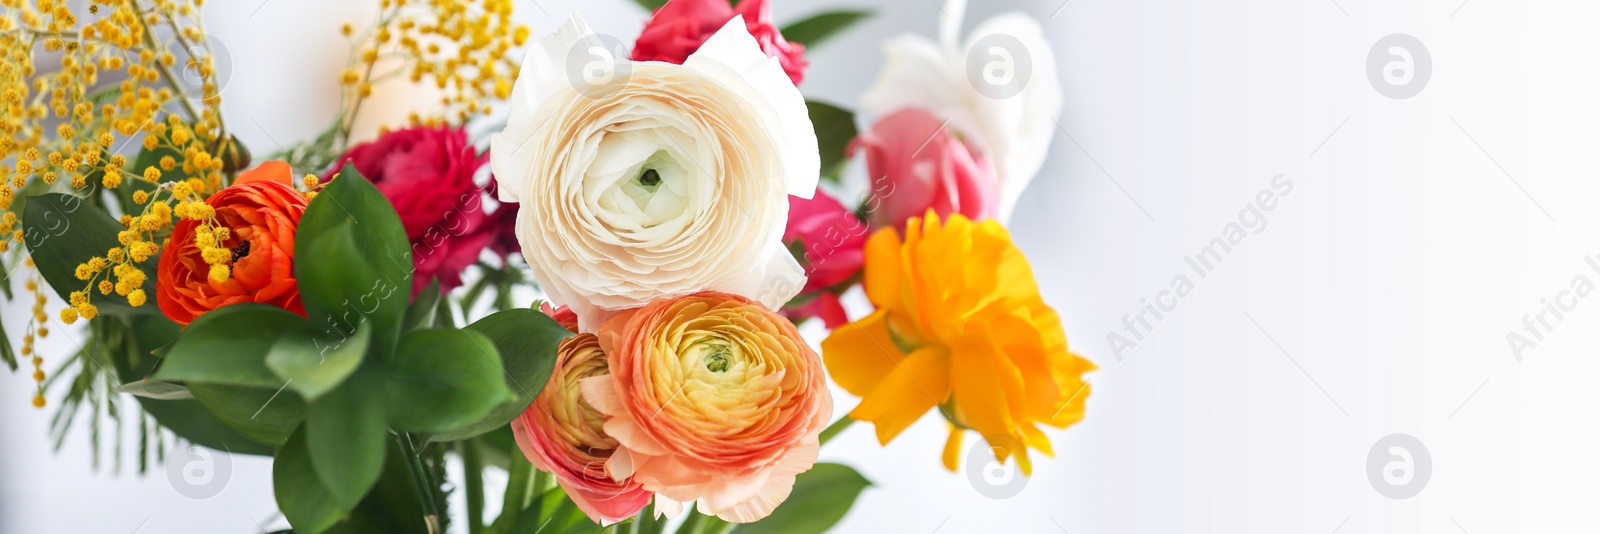 Image of Beautiful ranunculus flowers on white background, closeup view with space for text. Banner design